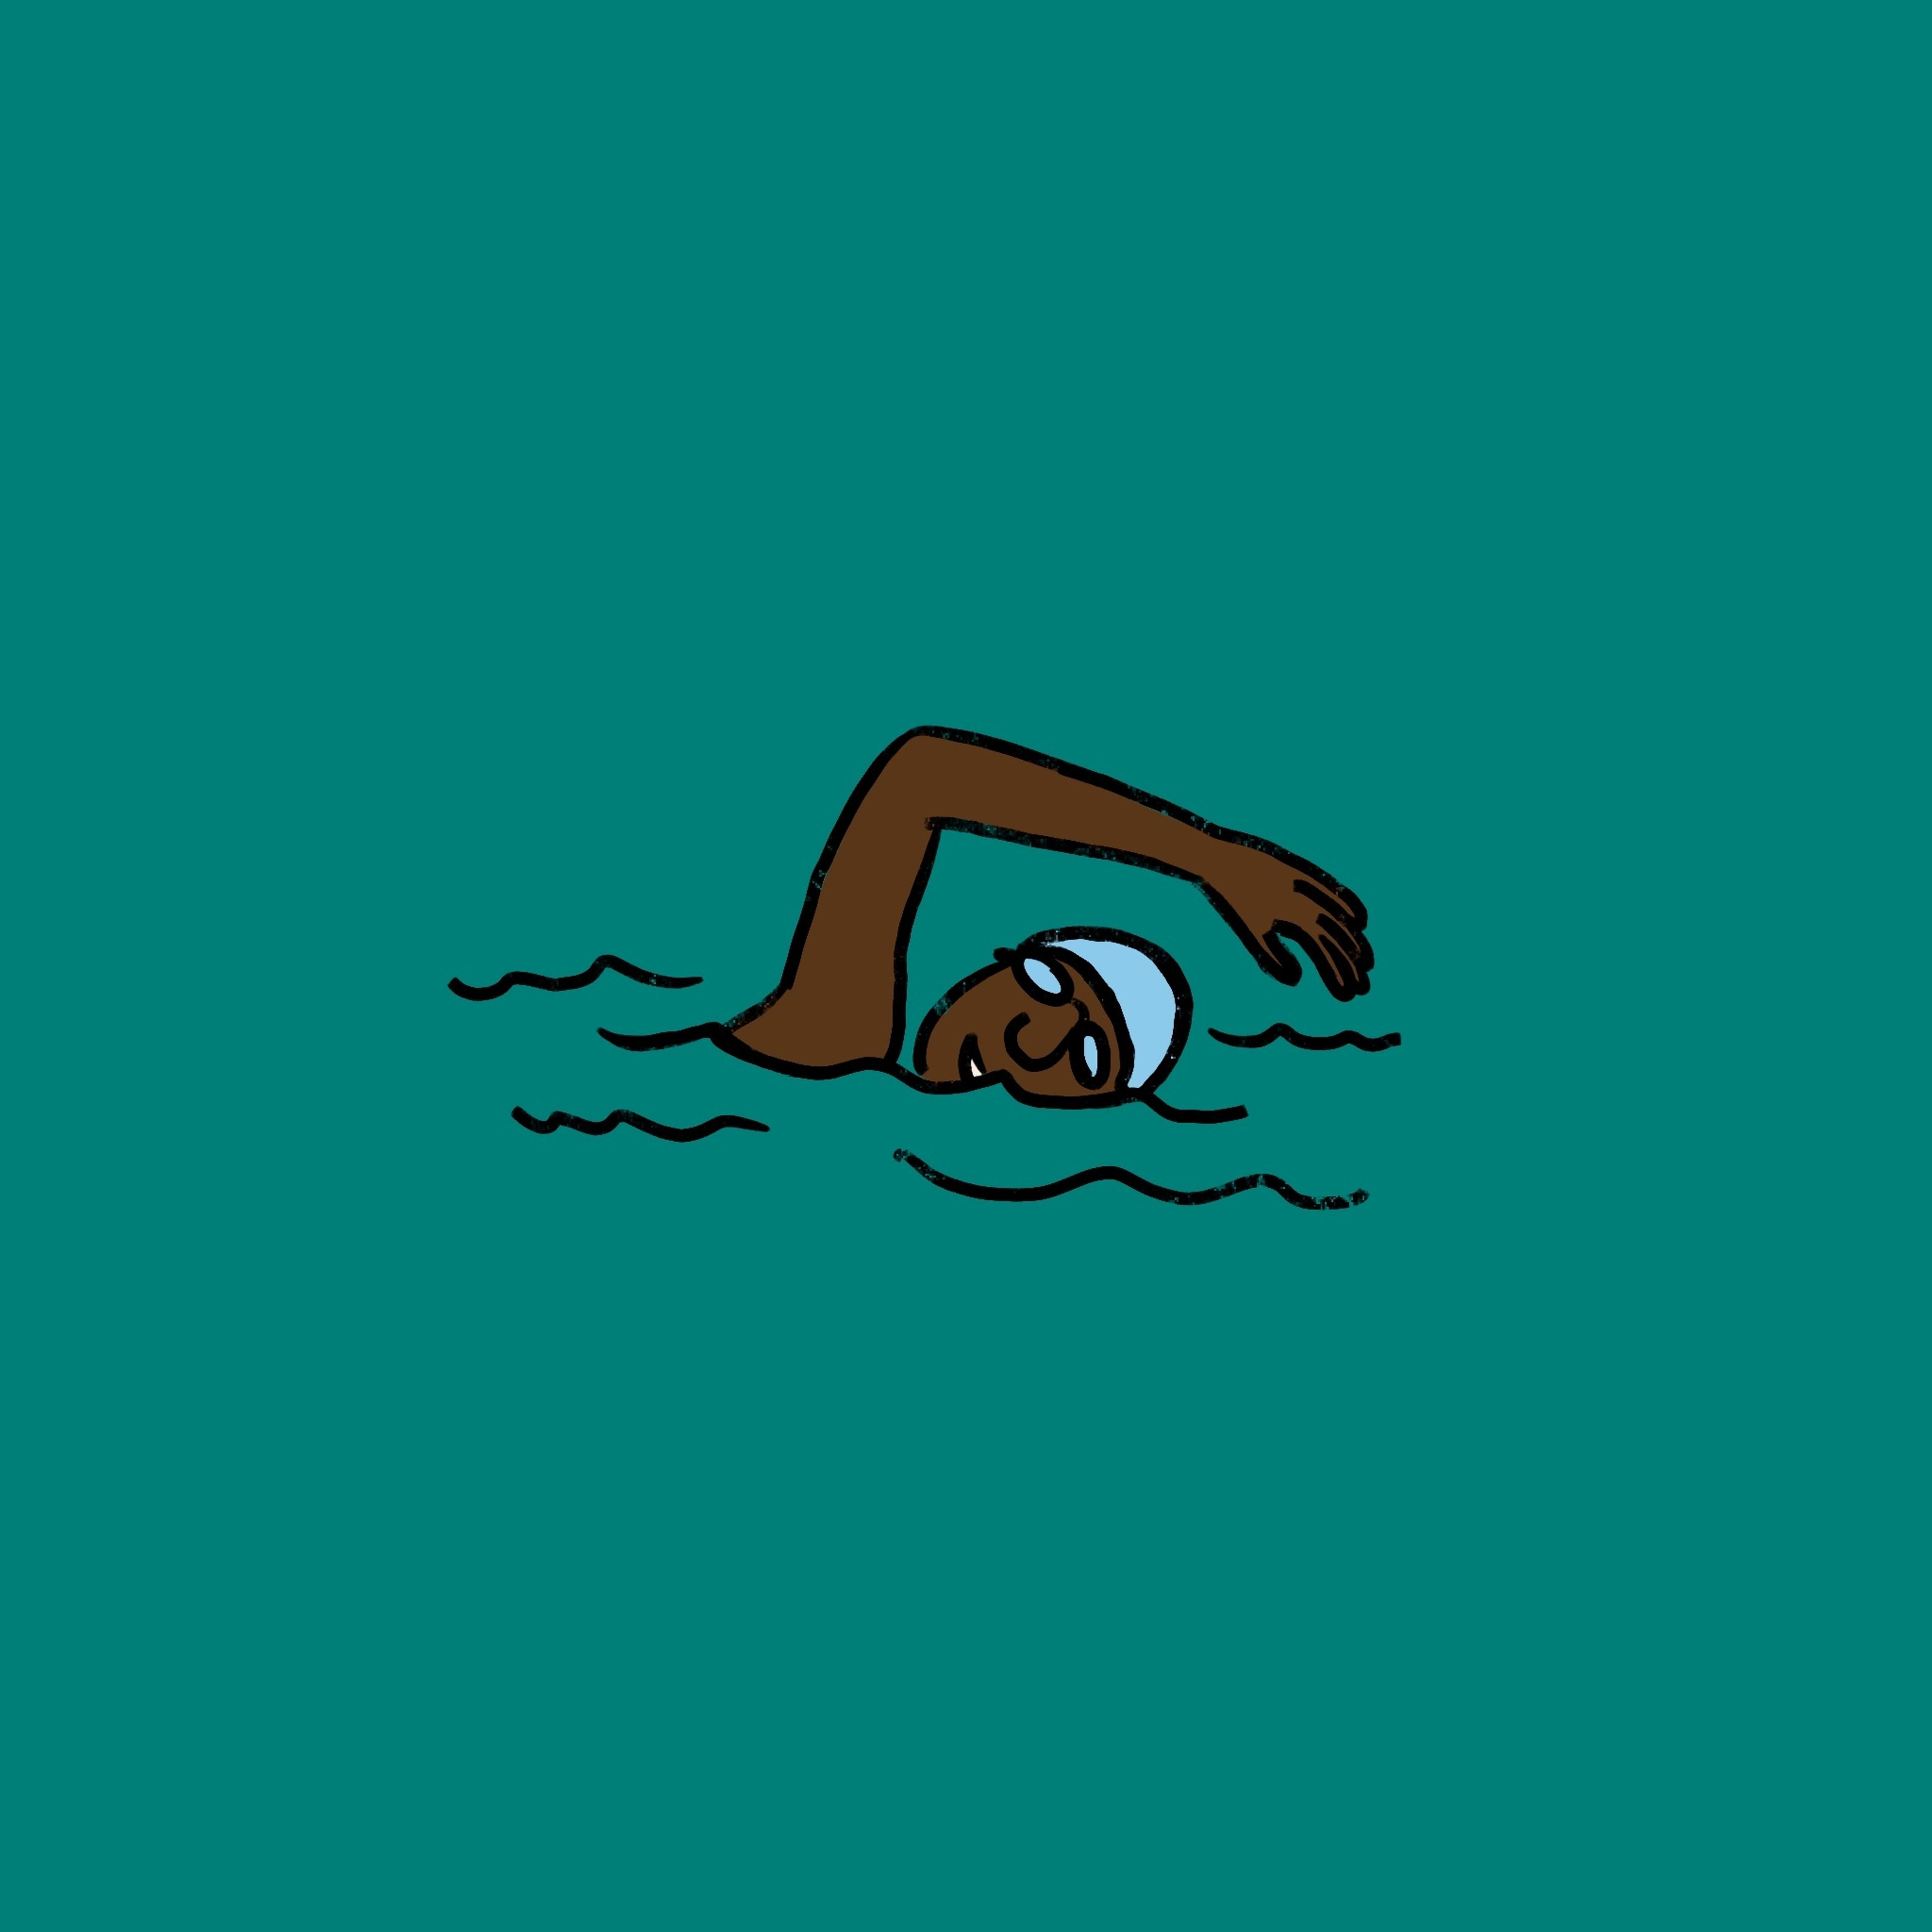 Illustration of a black person swimming in a teal background